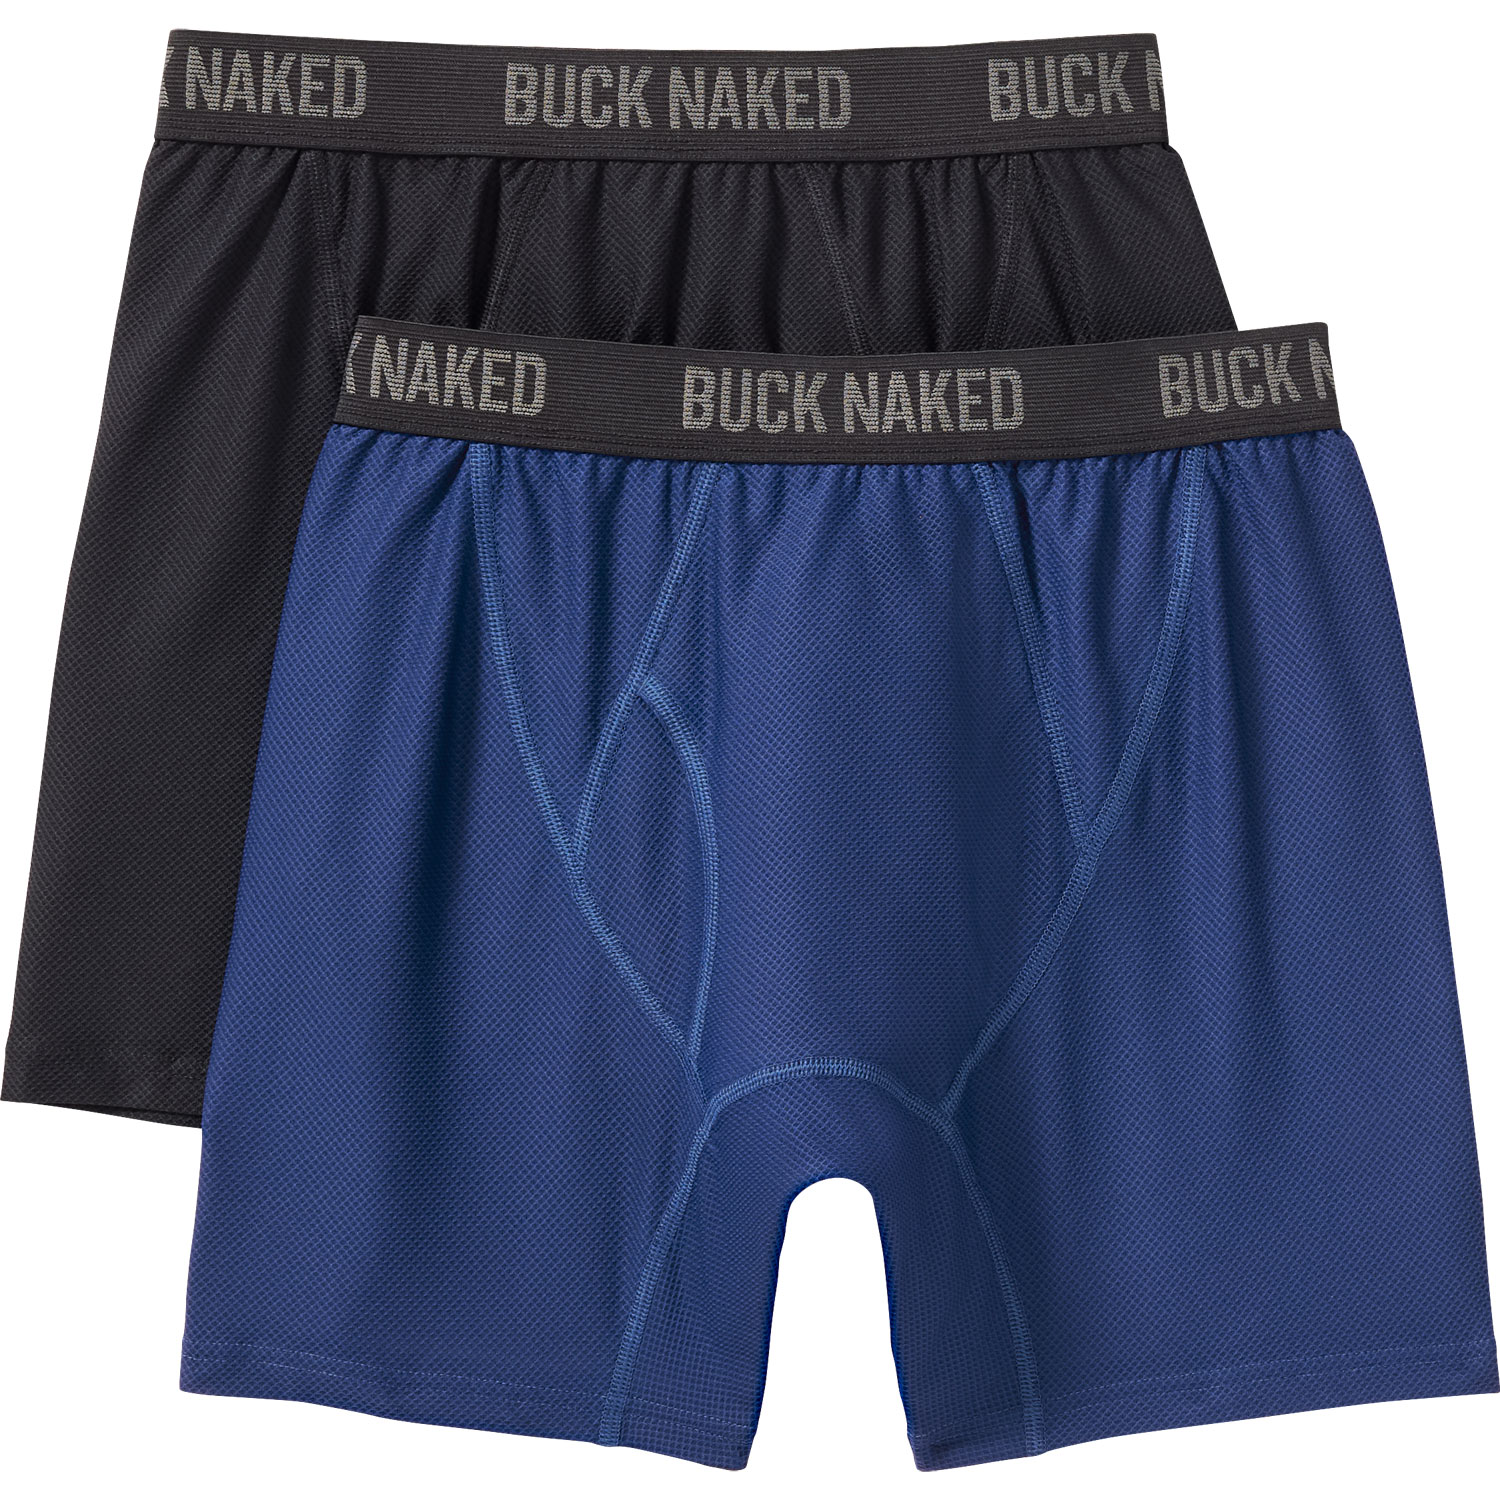 Duluth Trading Company - Three cheers to the jolly guy in red! And with the  no-pinch, no-stink, no-sweat performance of Buck Naked™ Underwear, you'll  be as jolly as St. Nick himself. Get